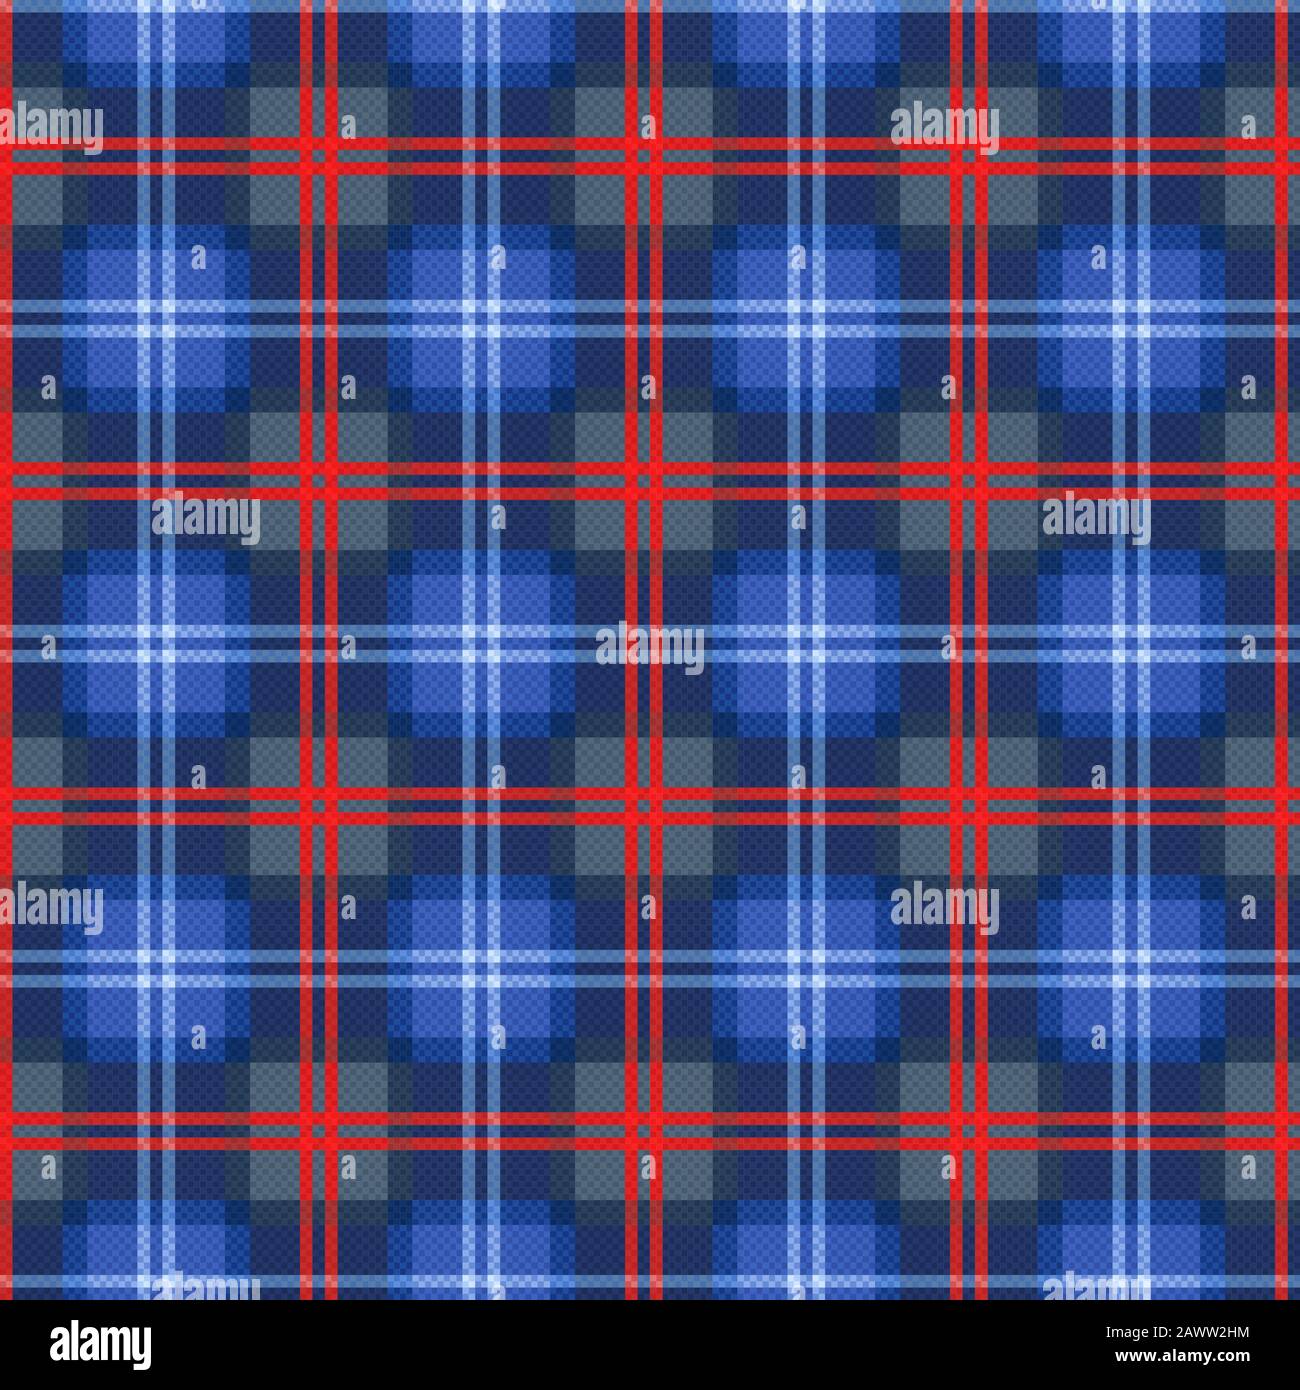 Seamless checkered traditional fabric pattern mostly in blue hues with bright red lines, illustration pattern as a tartan plaid Stock Vector